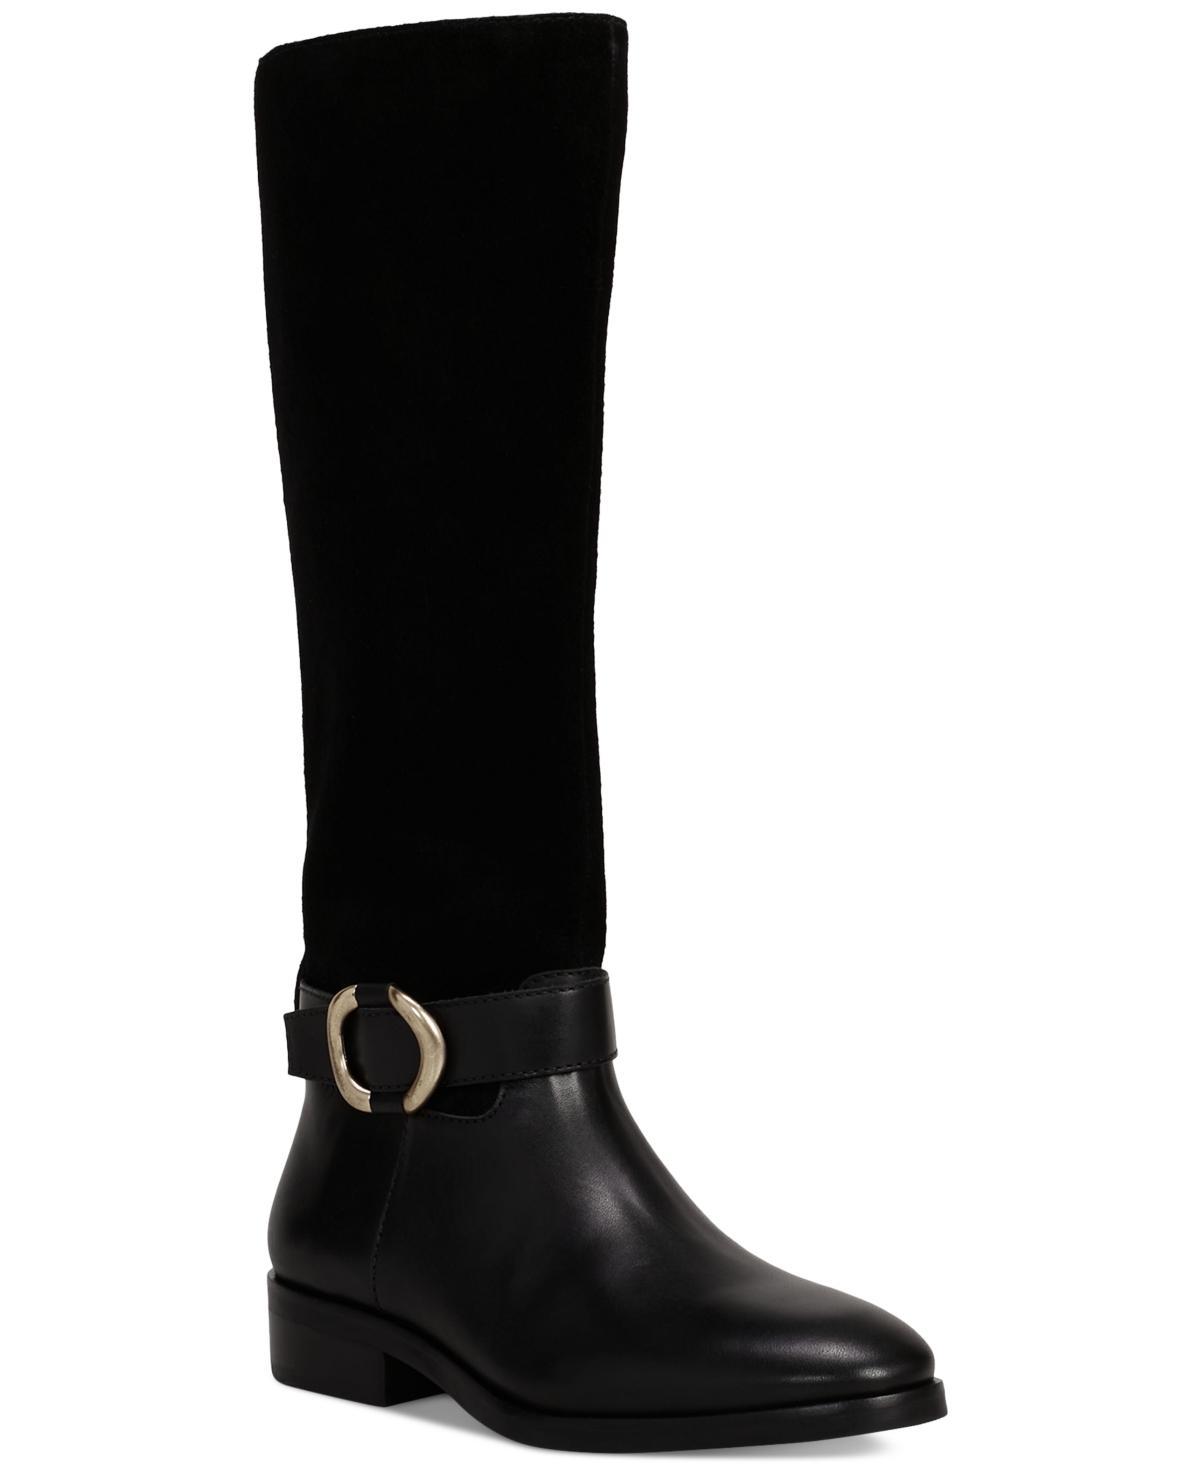 Vince Camuto Samtry Knee High Boot Product Image